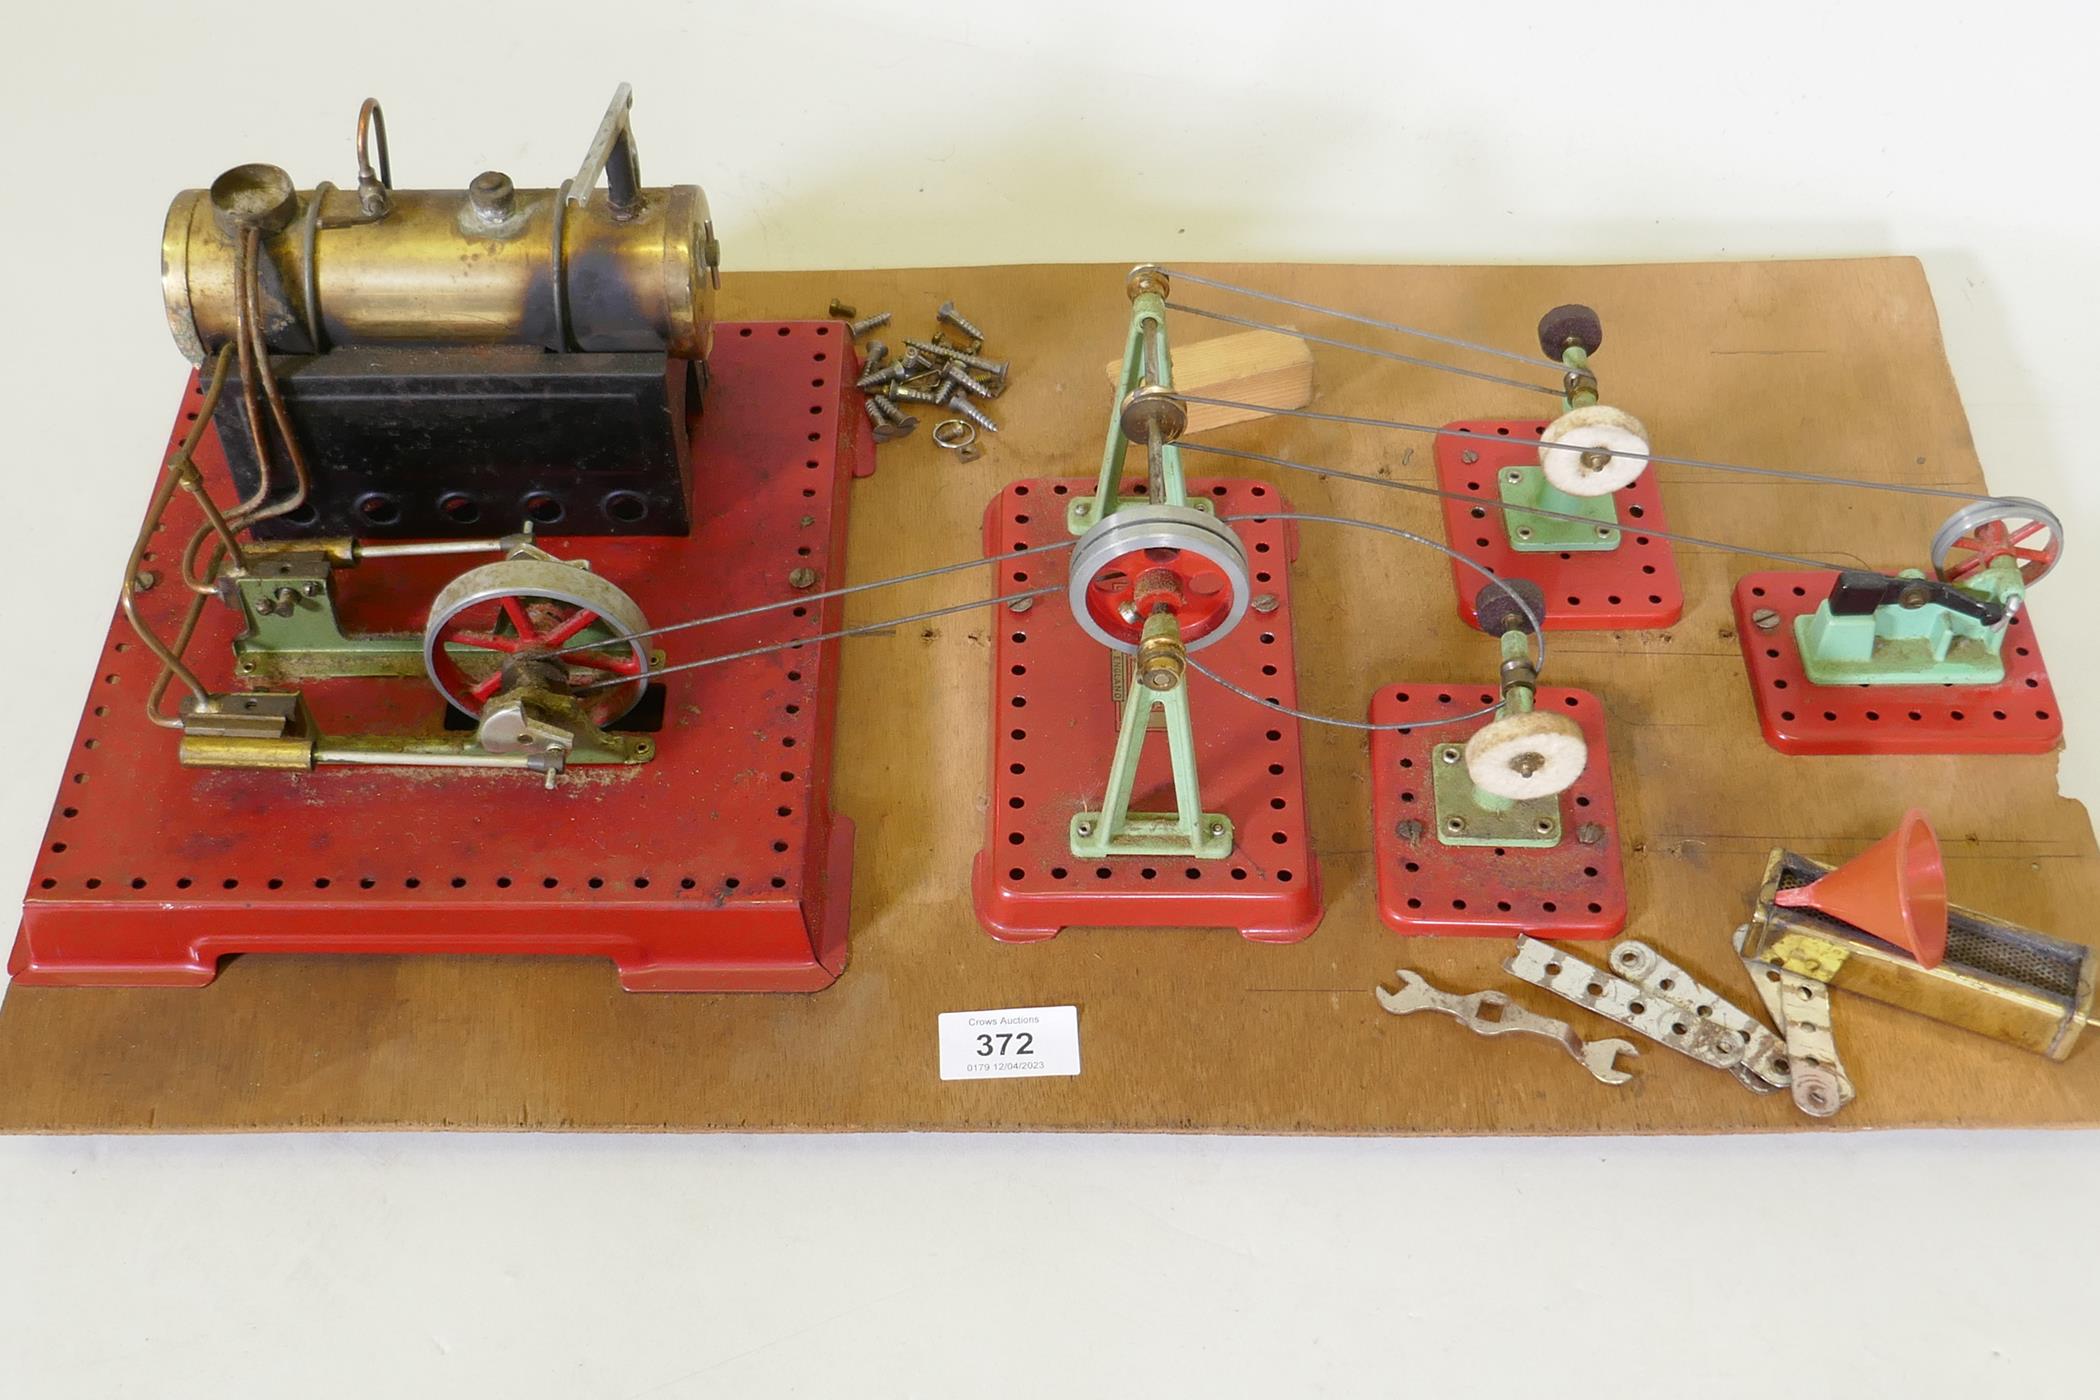 A Mamod steam driven workshop, mounted on a wood board, 60 x 35cm - Image 2 of 3